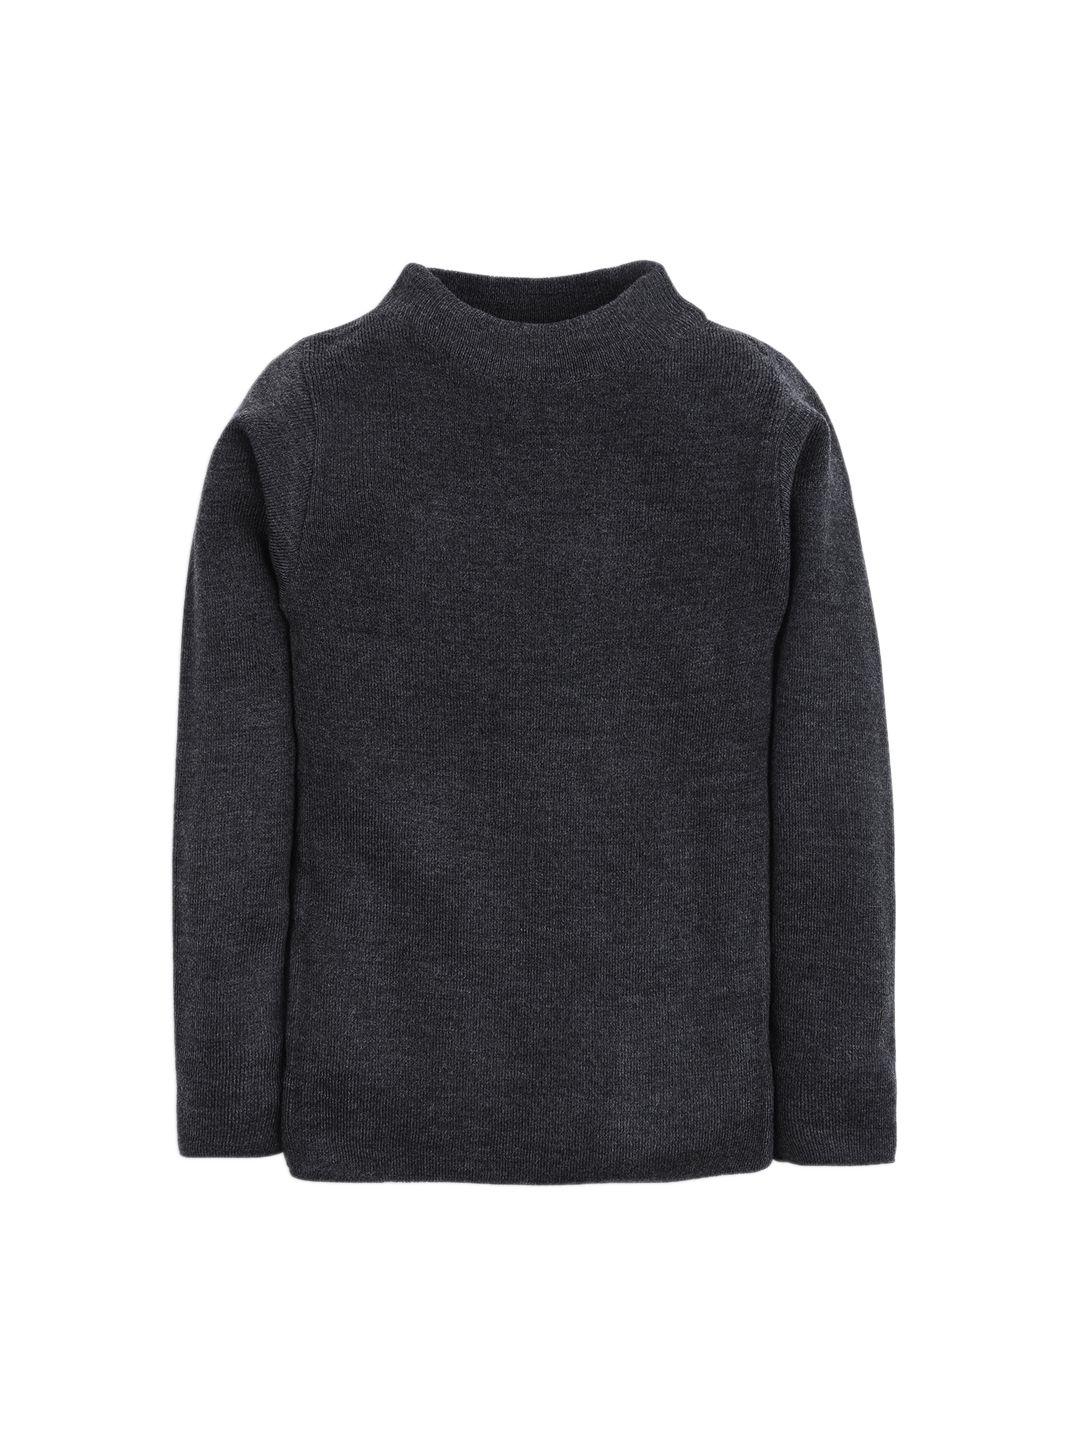 rvk unisex charcoal grey solid sweater